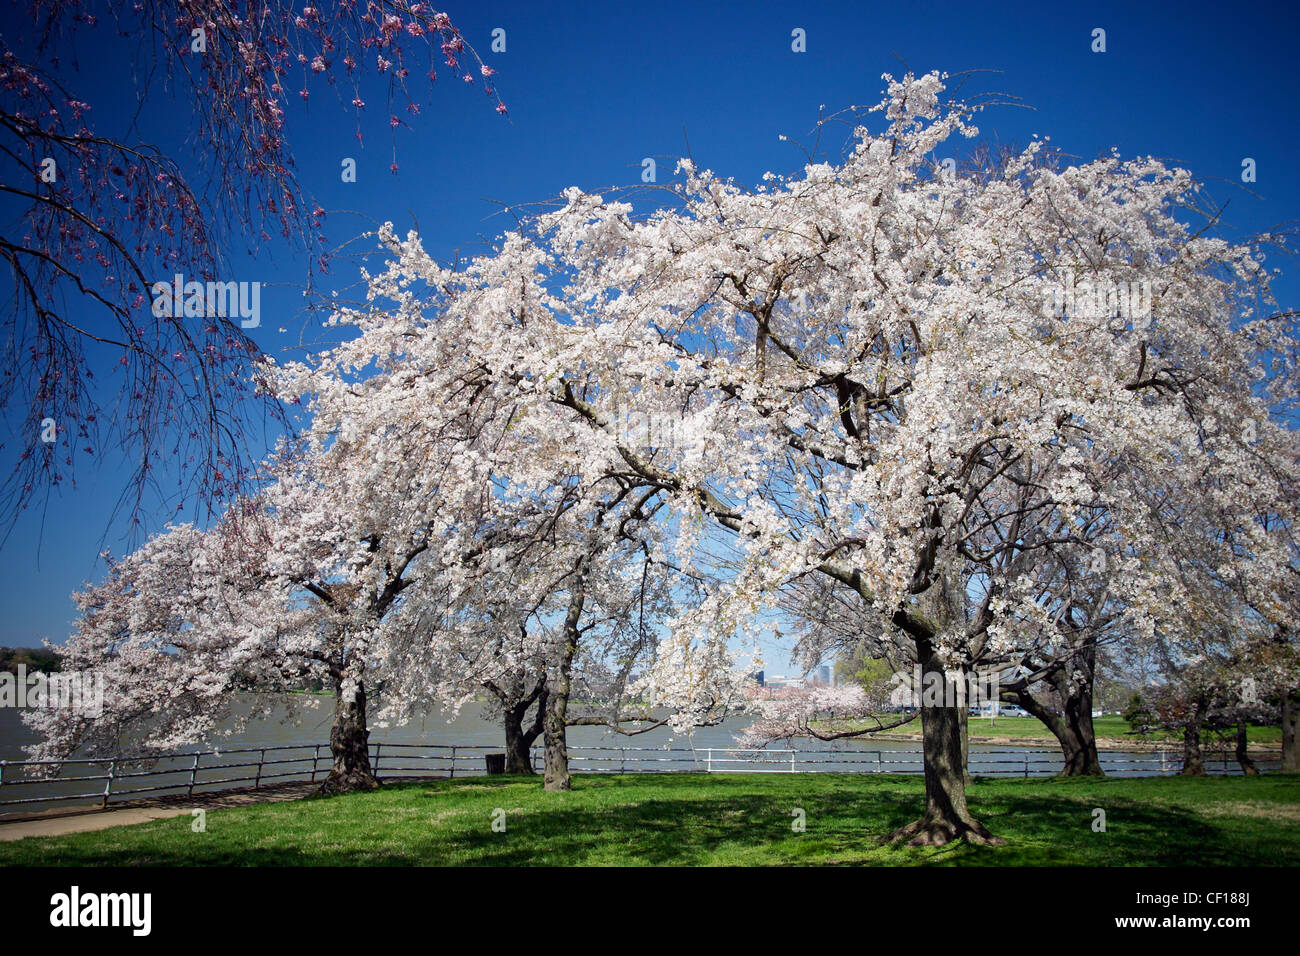 Blooming Japanese cherry blossom trees on the east bank of the Potomac River, Washington, DC. Stock Photo